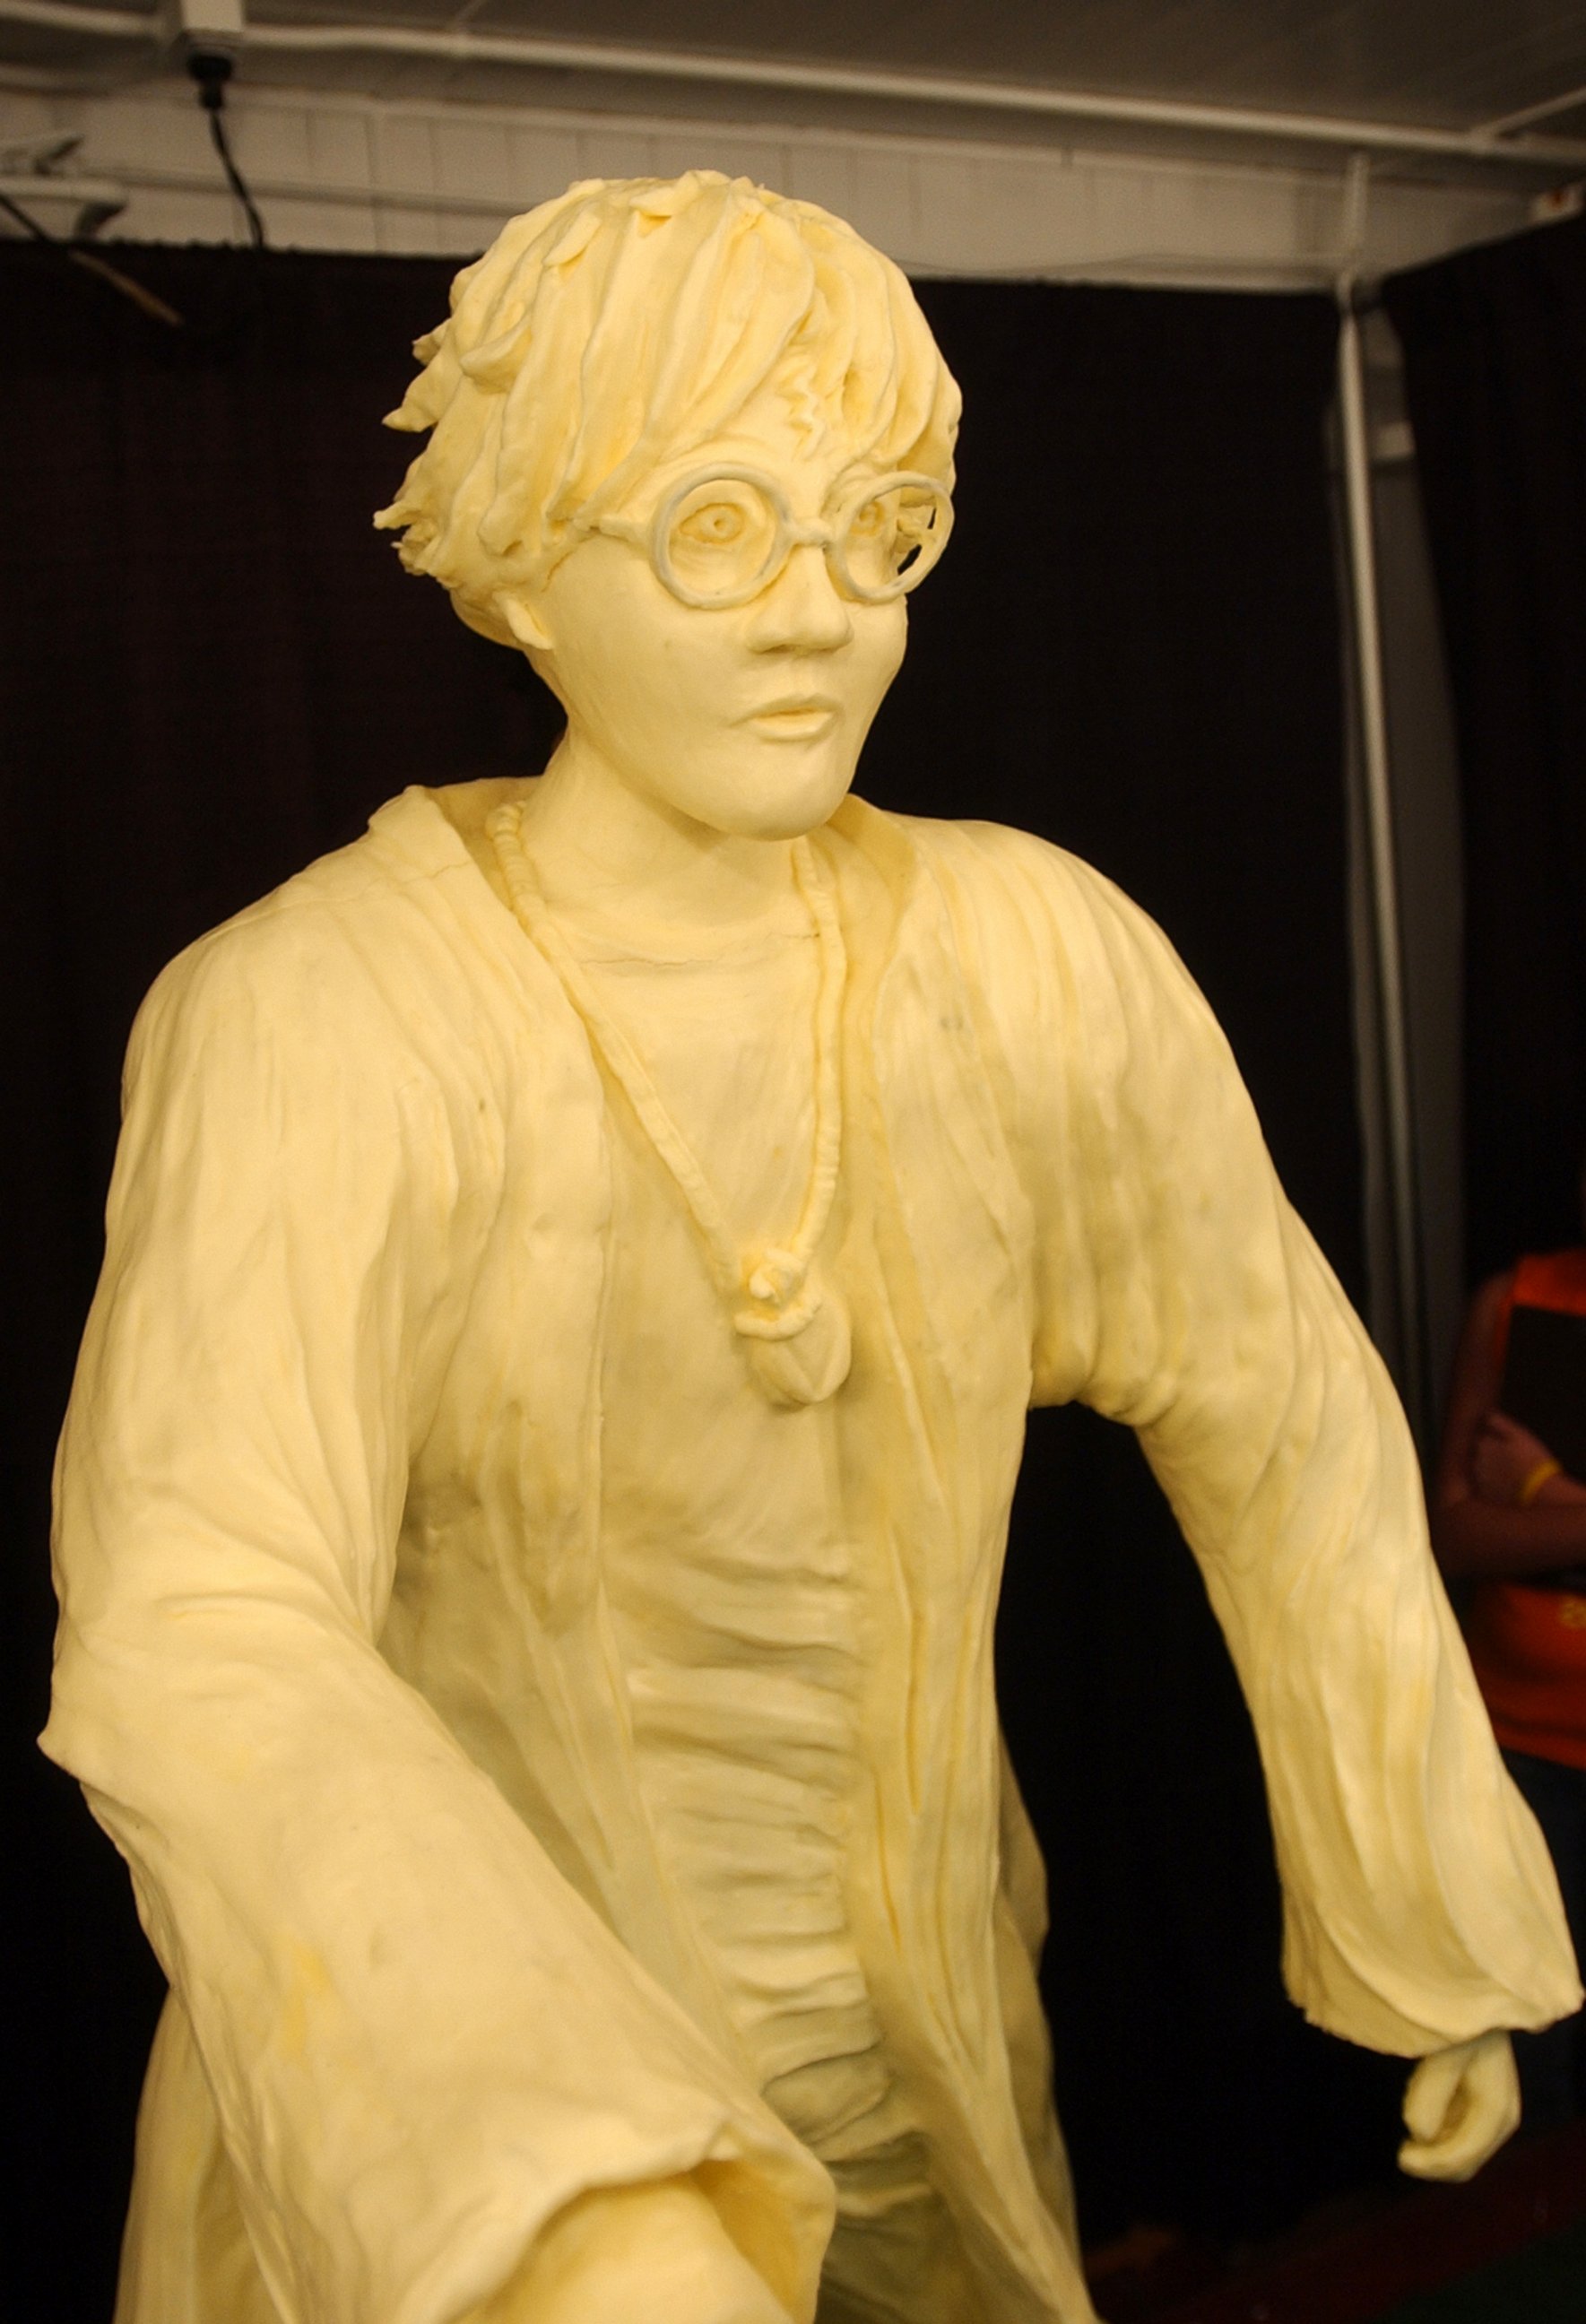 PHOTO: The Iowa State Fair's 2007 companion butter sculpture of Harry Potter.